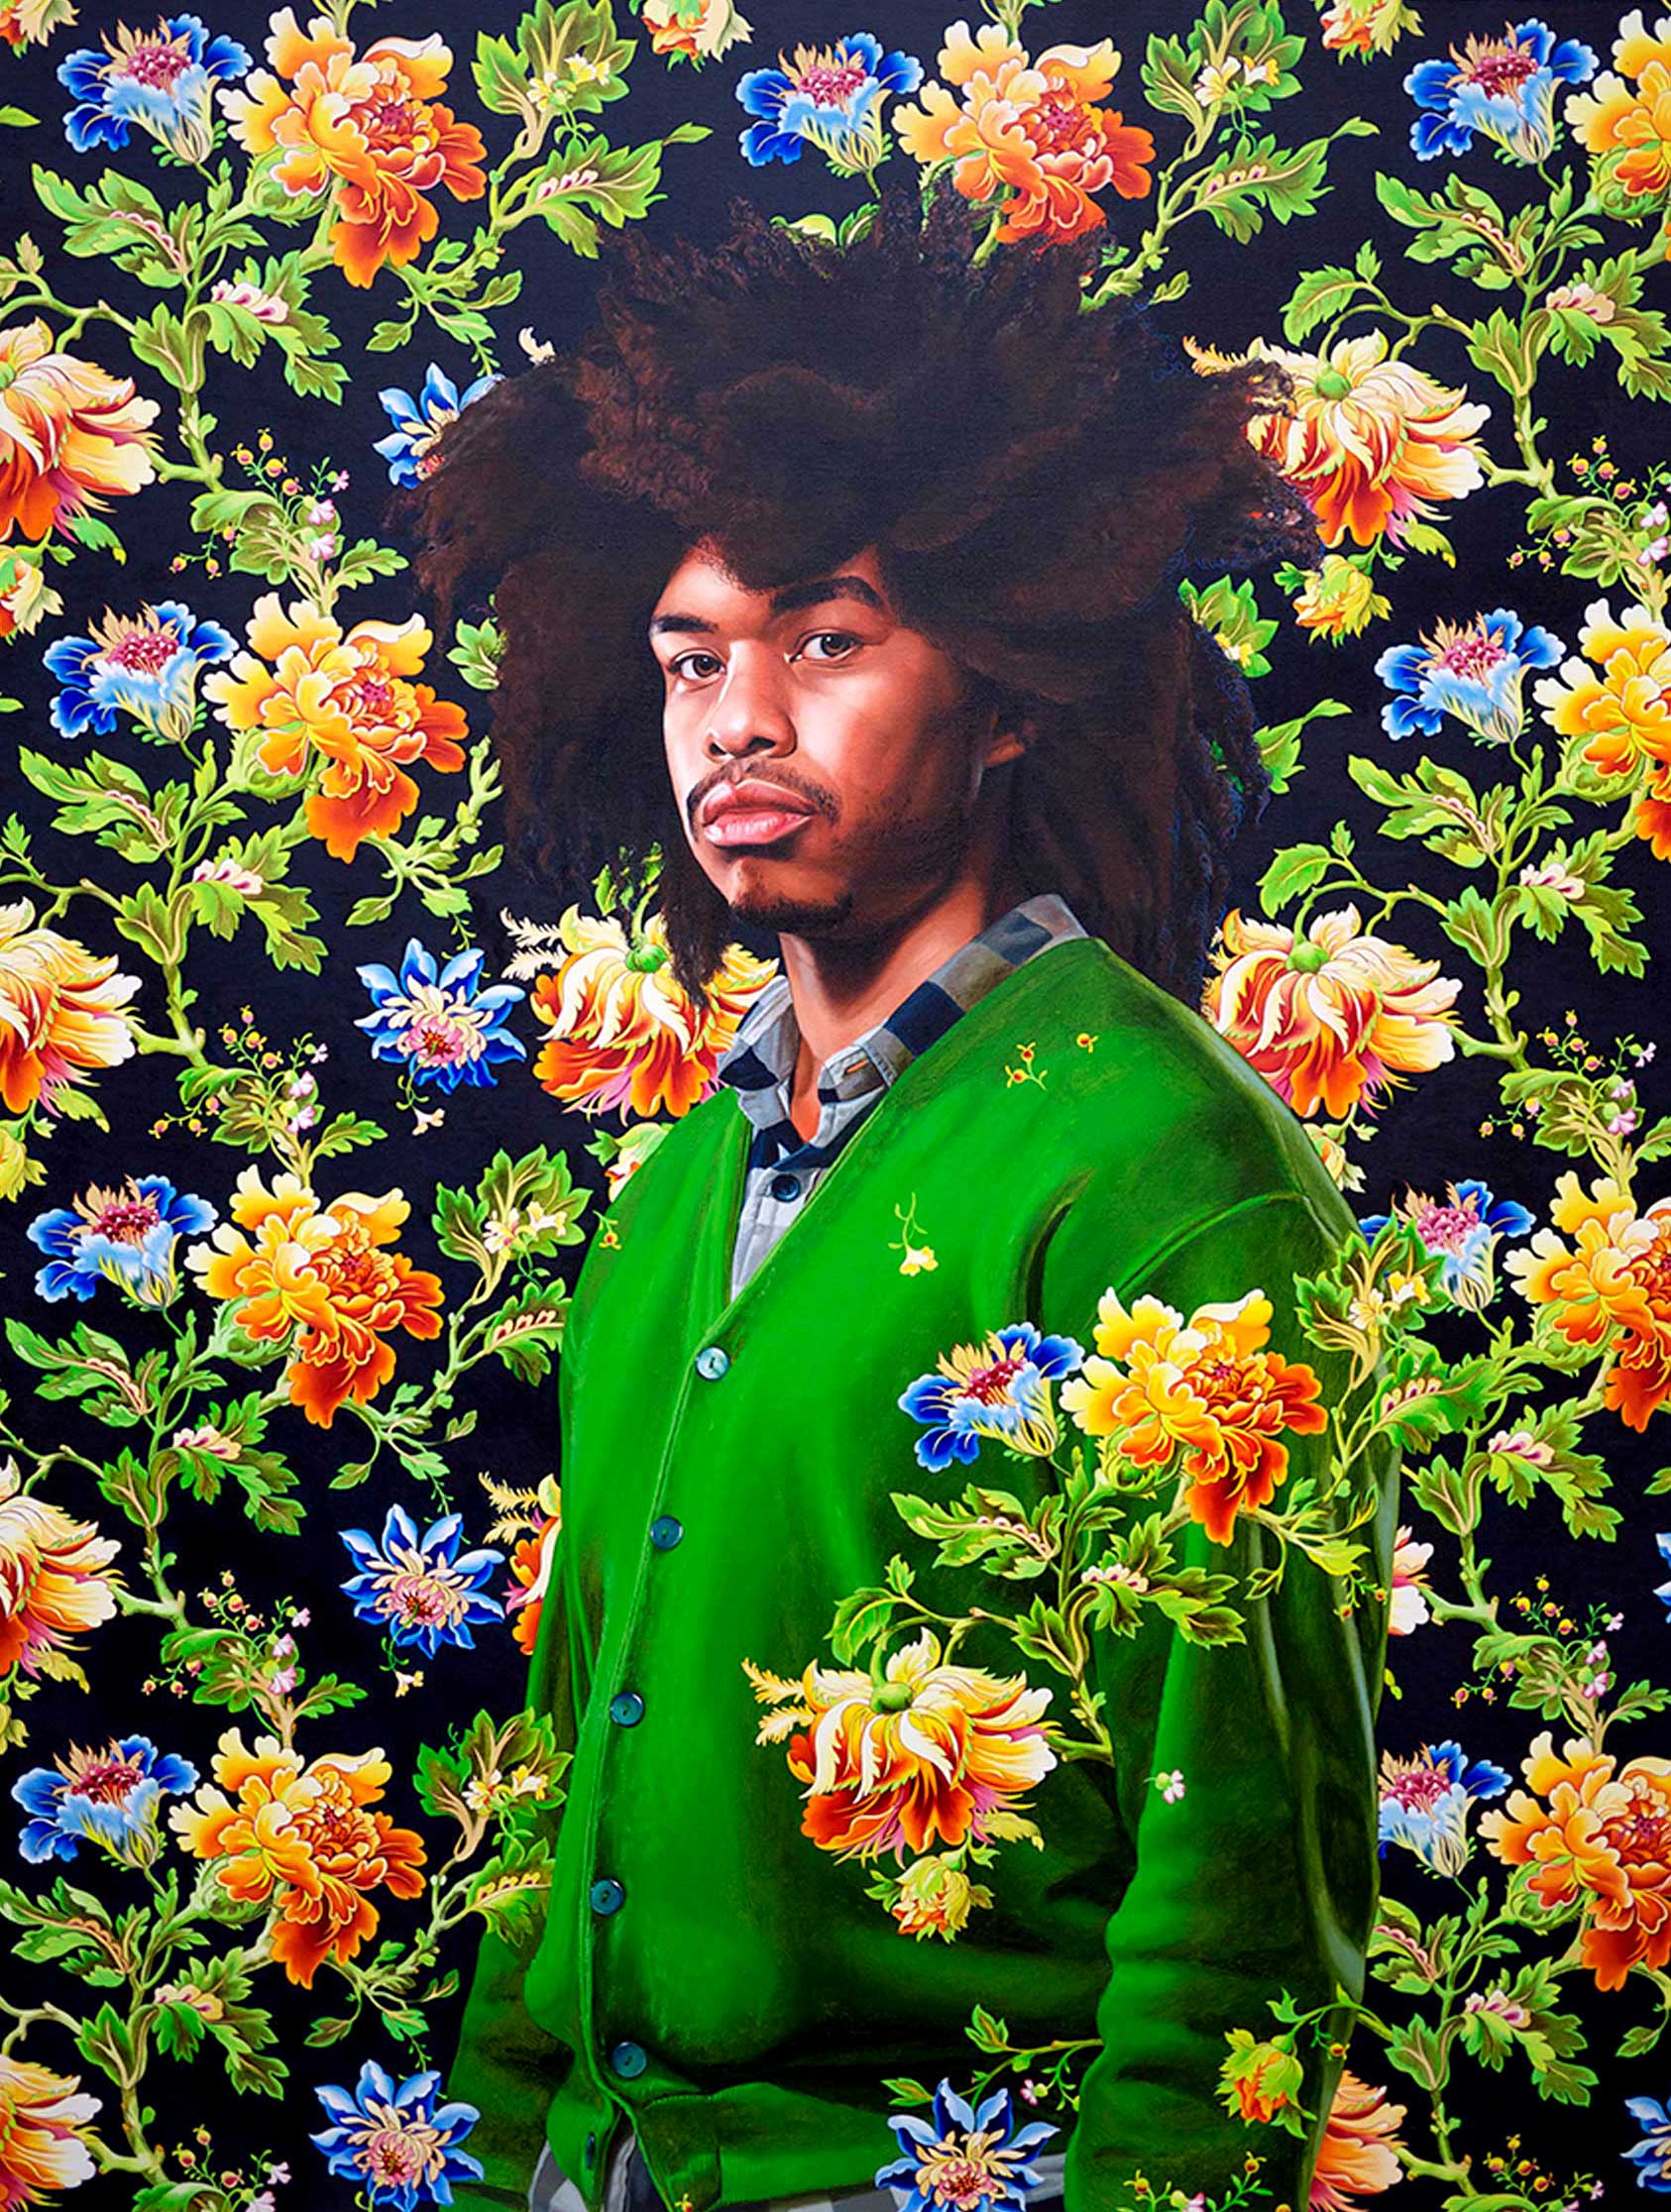 Kehinde Wiley | Selected Works: 2011 | Terence Nance III, 2011 Oil on Canvas. | 7